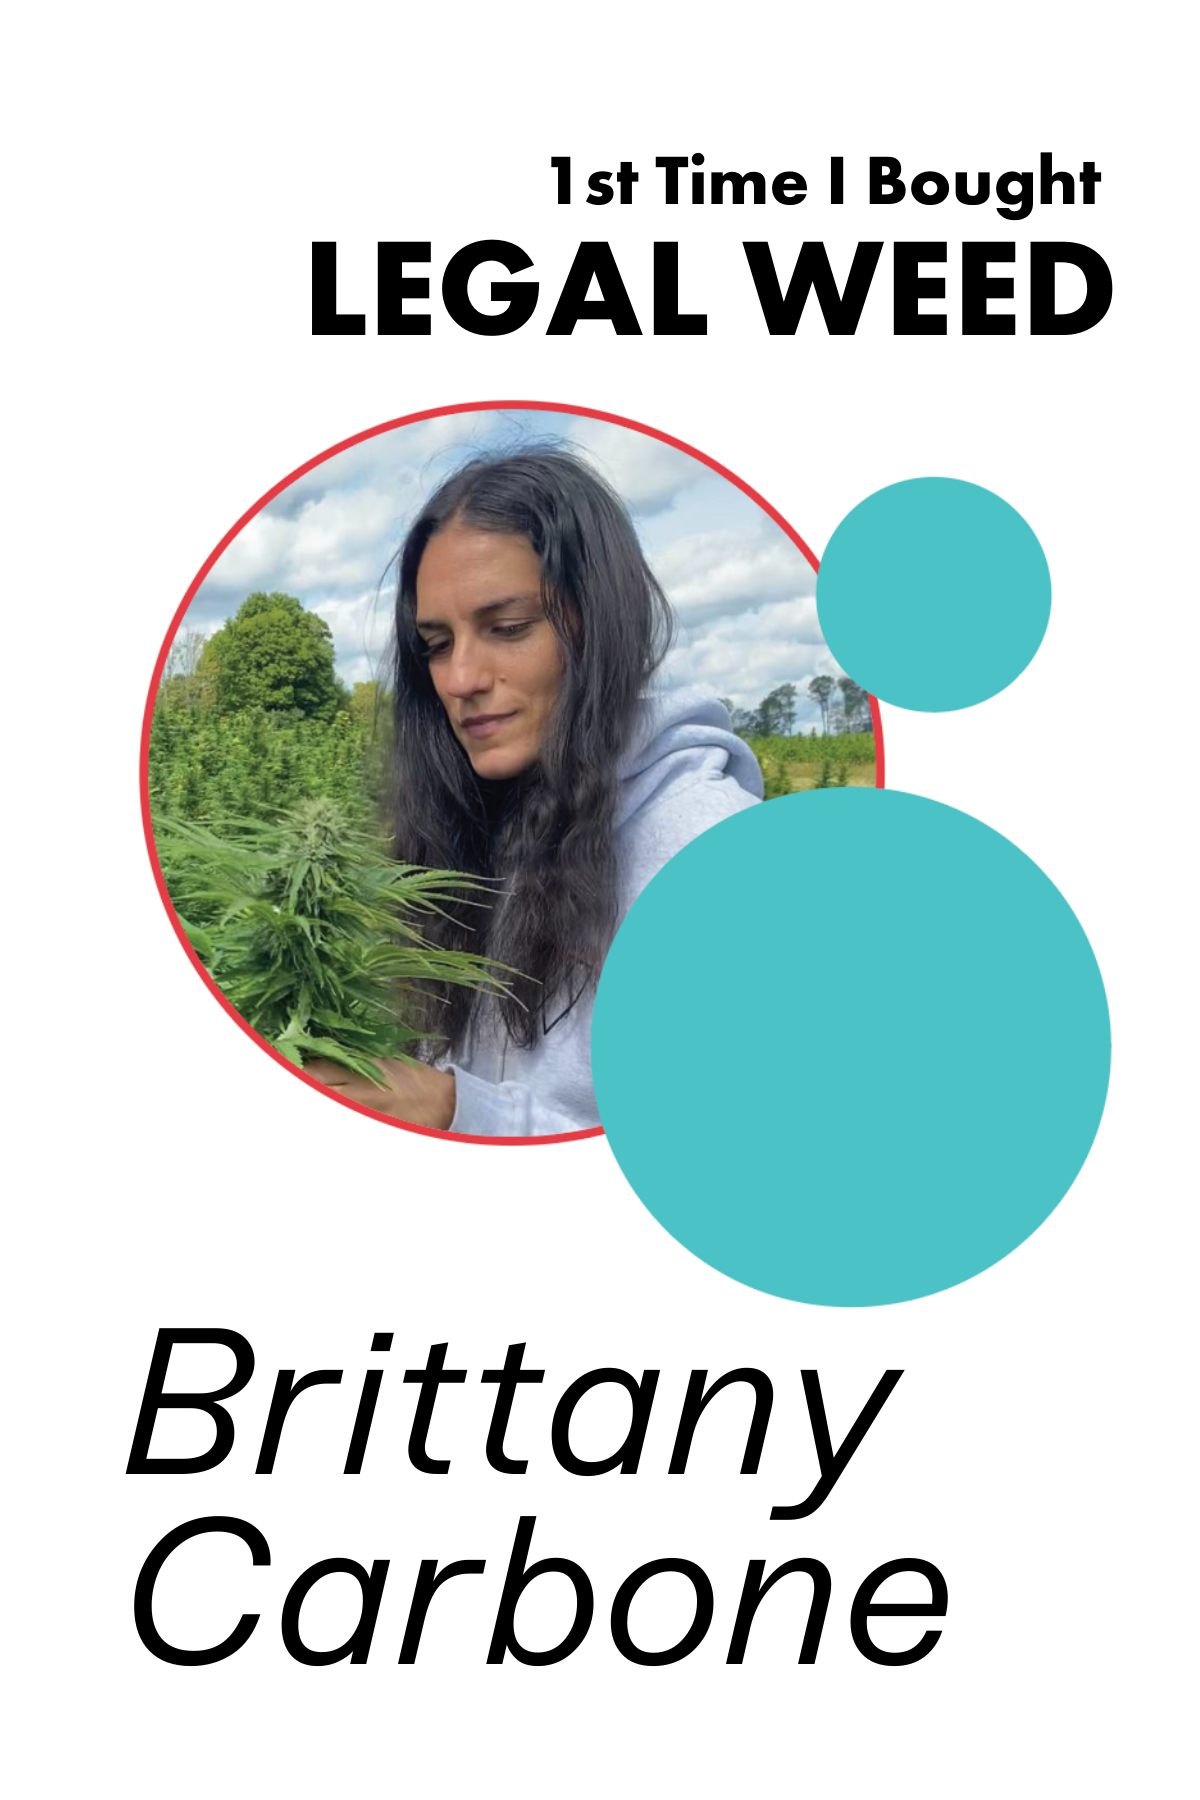 72. 1st Time I Bought Legal Weed: Brittany Carbone Co-Founder of Tricolla Farms and Bardo Labs